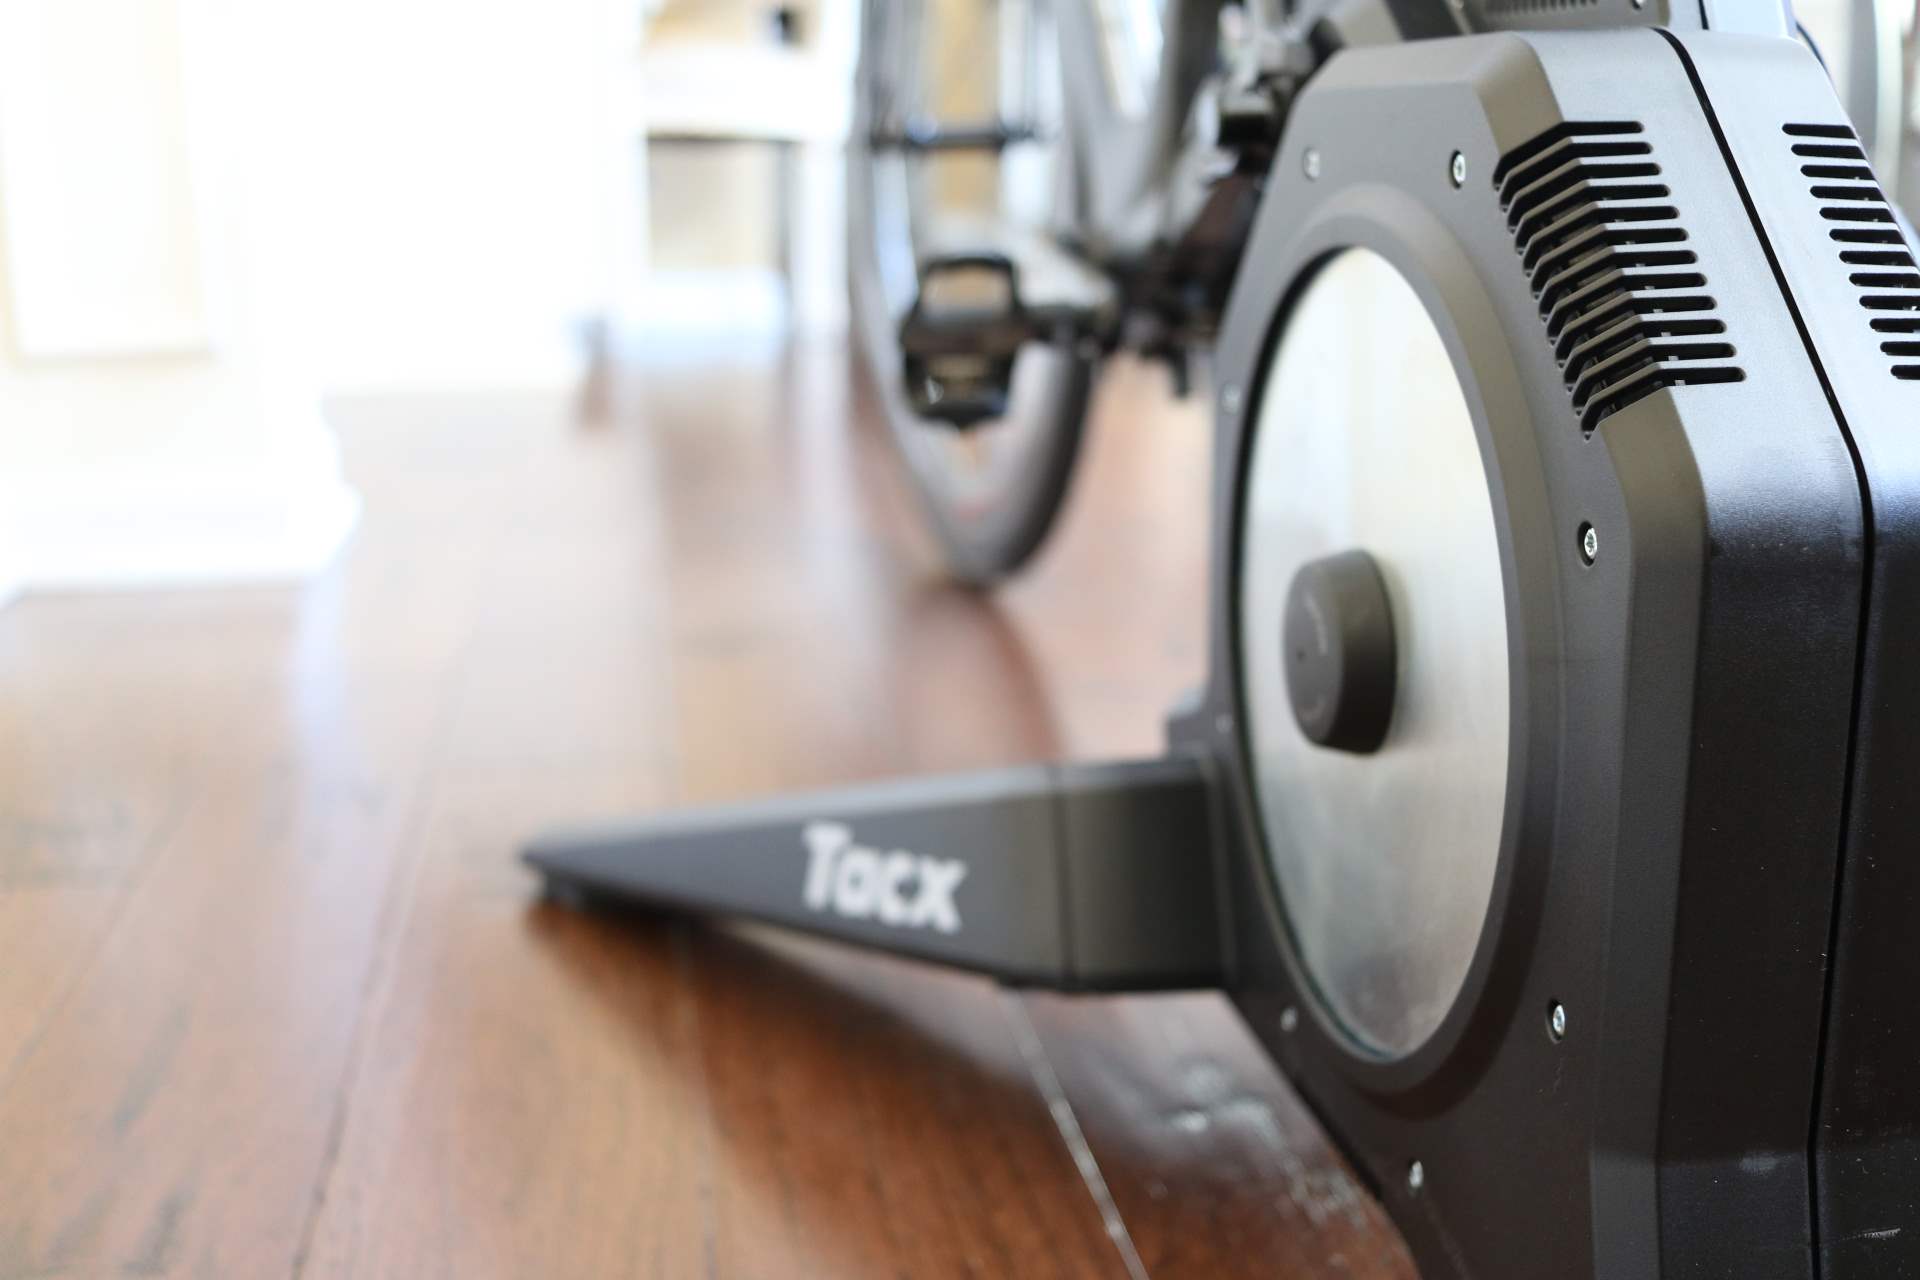 The State Of The Tacx Flux Smart Trainer And What Is Tacx Doing It - SMART Bike Trainers